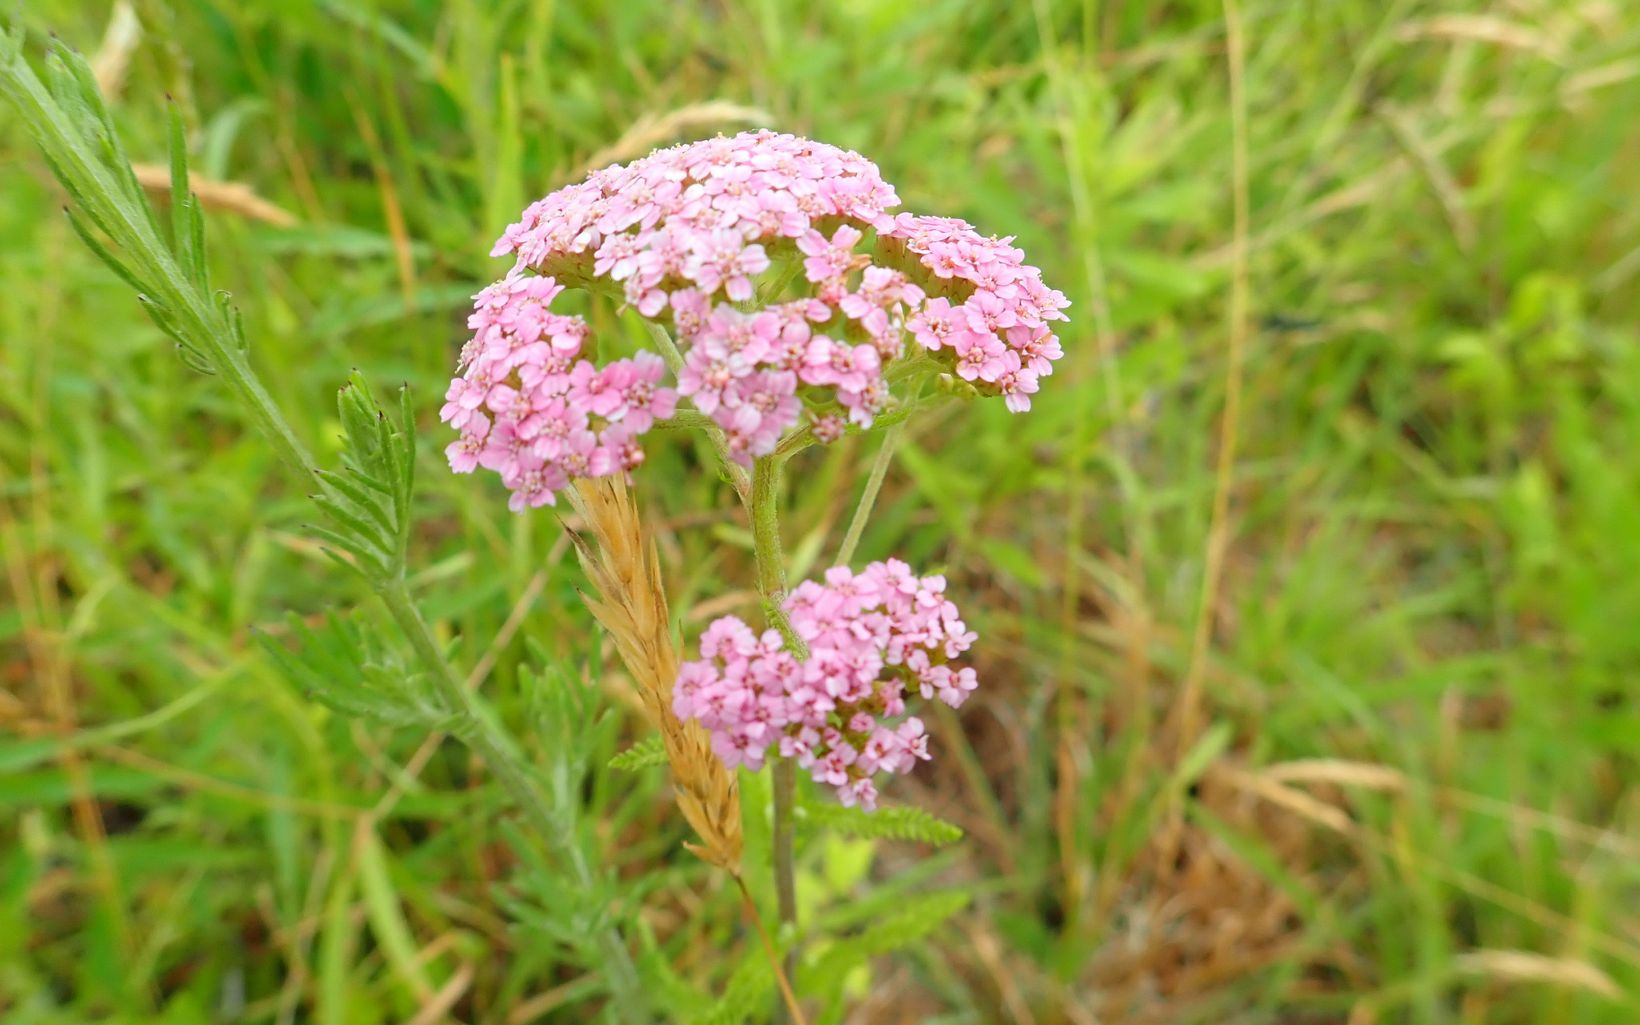 A plant with clusters of small pink flowers.